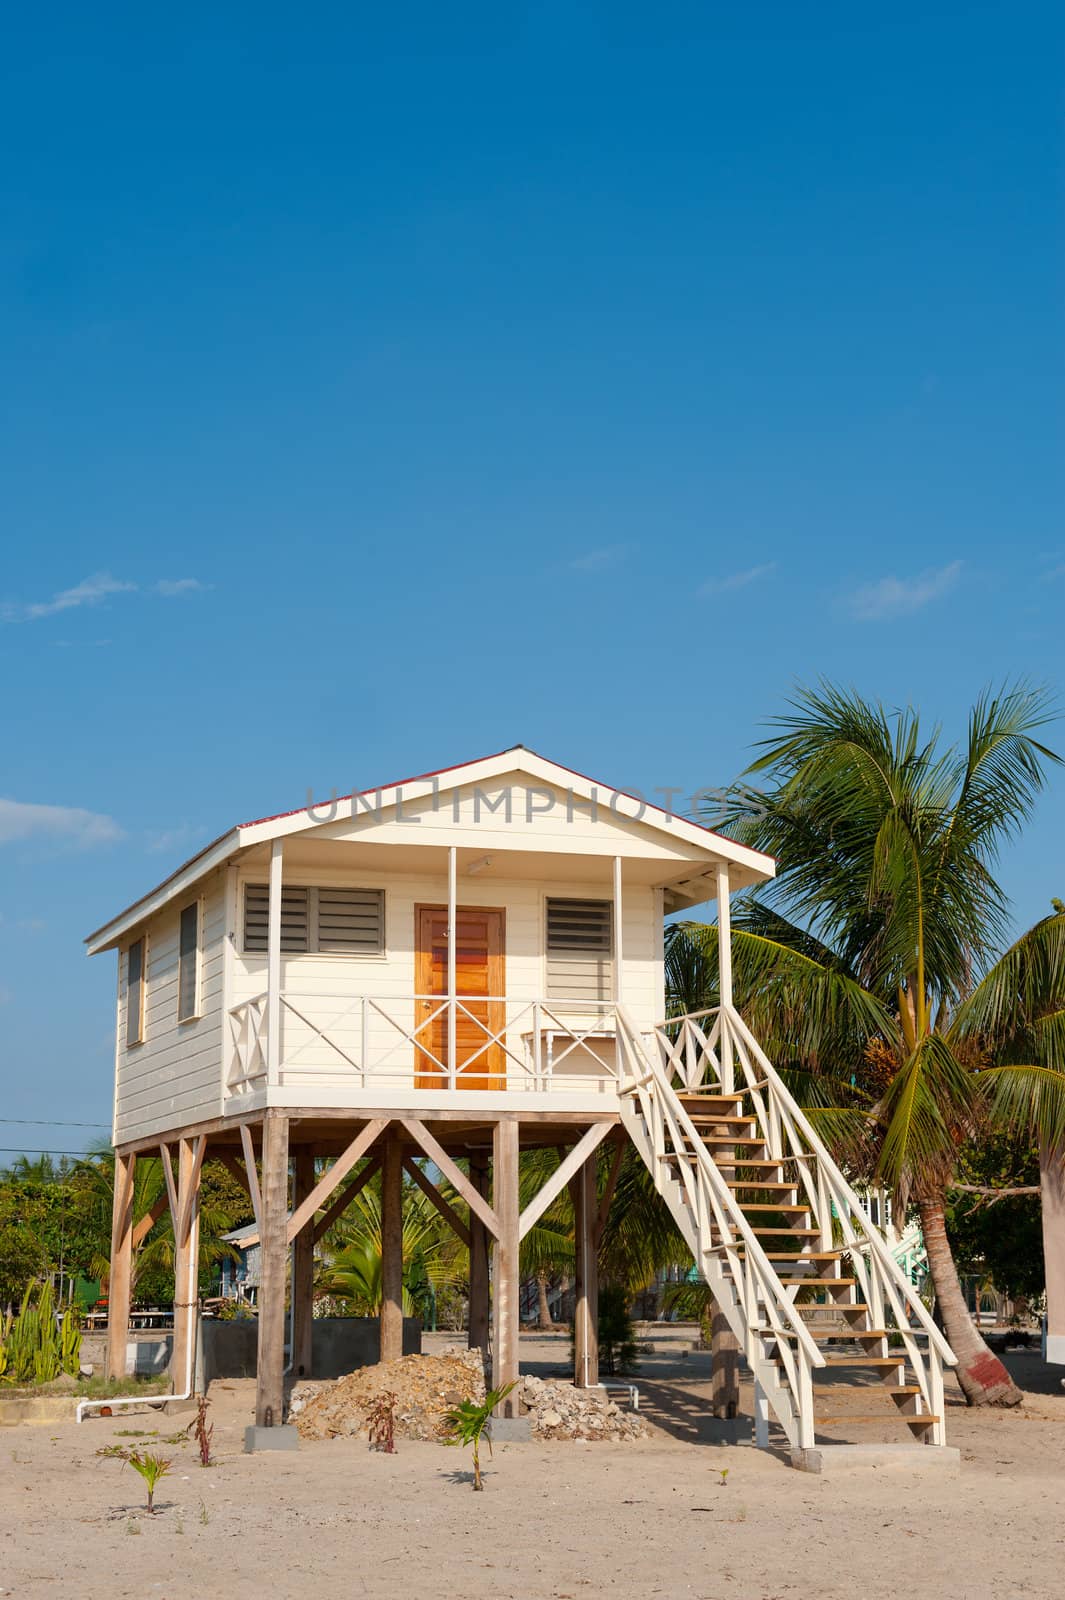 Caribbean house on the beach, Placencia, Belize.